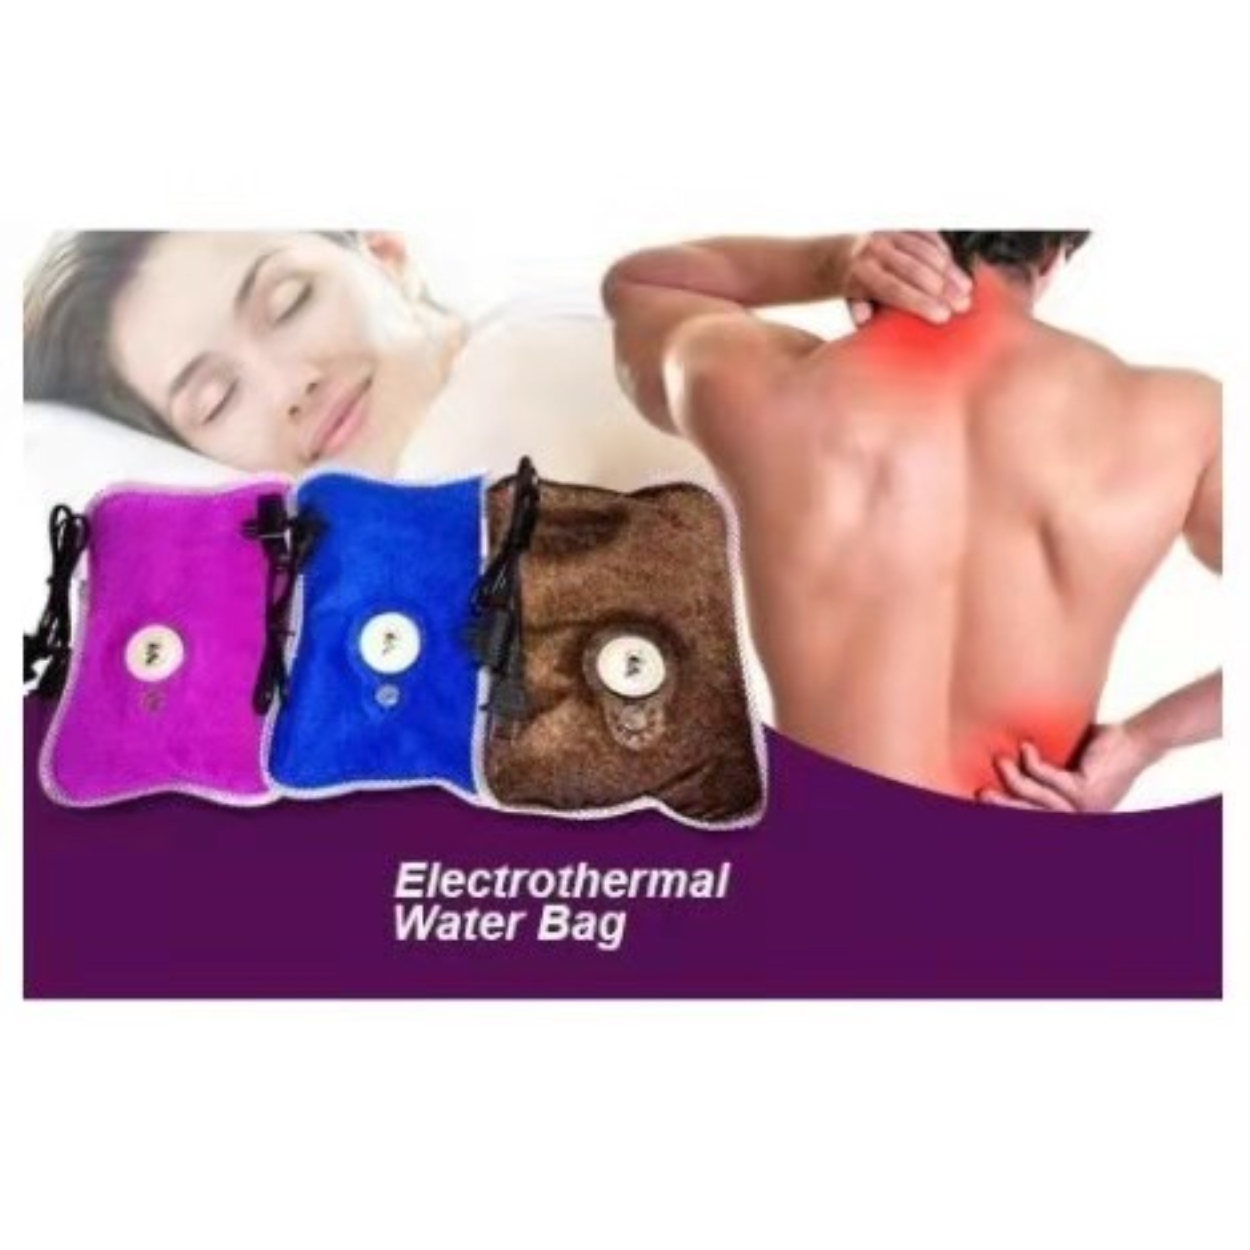 Keyi Warmth Series Pain Reliefer Hot Bag Electrothermal Heating Pad